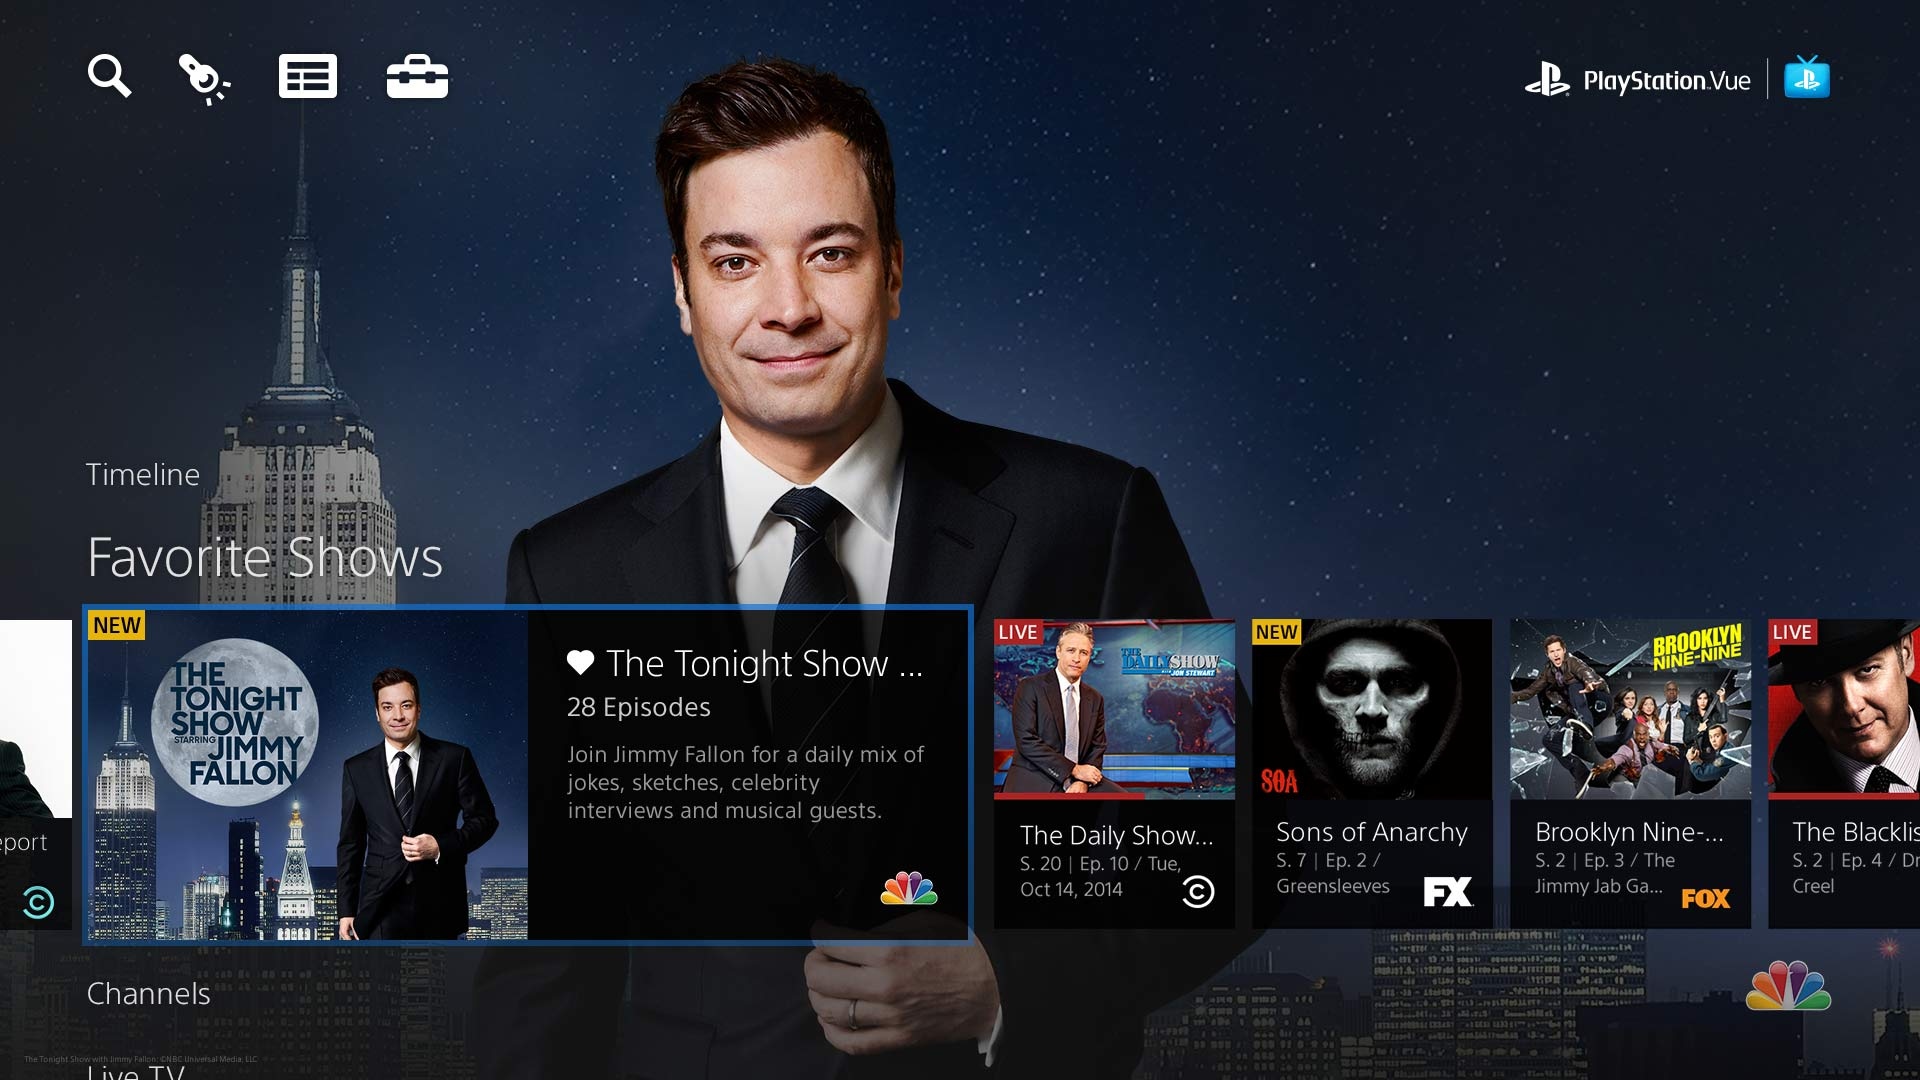 Editorial: Here is PlayStation Vue’s Biggest Weakness…